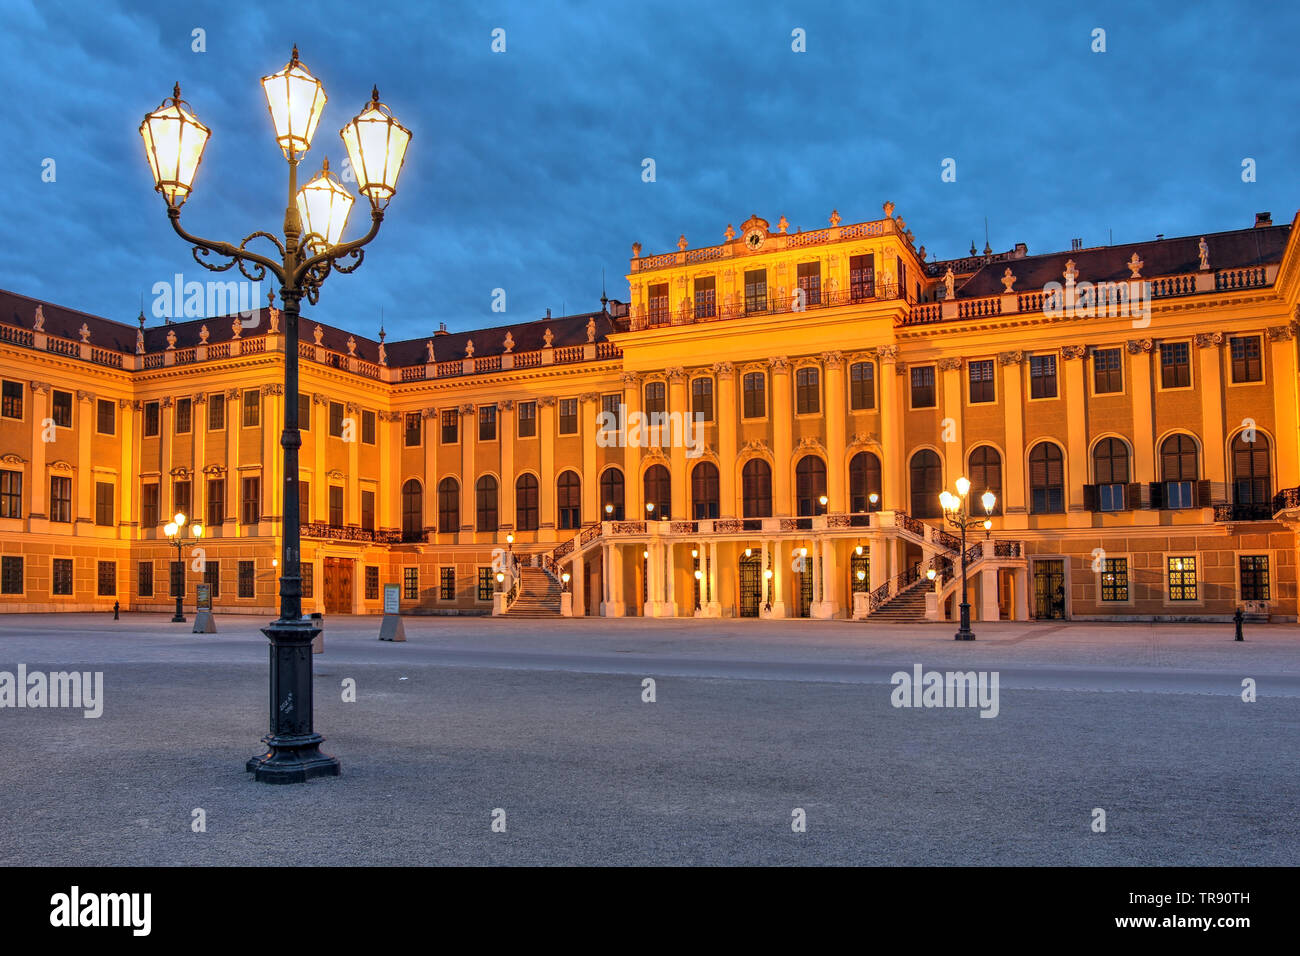 Night scene of the famous Schönbrunn Palace (the main summer residence of the Habsburg family) in Vienna, Austria. Stock Photo